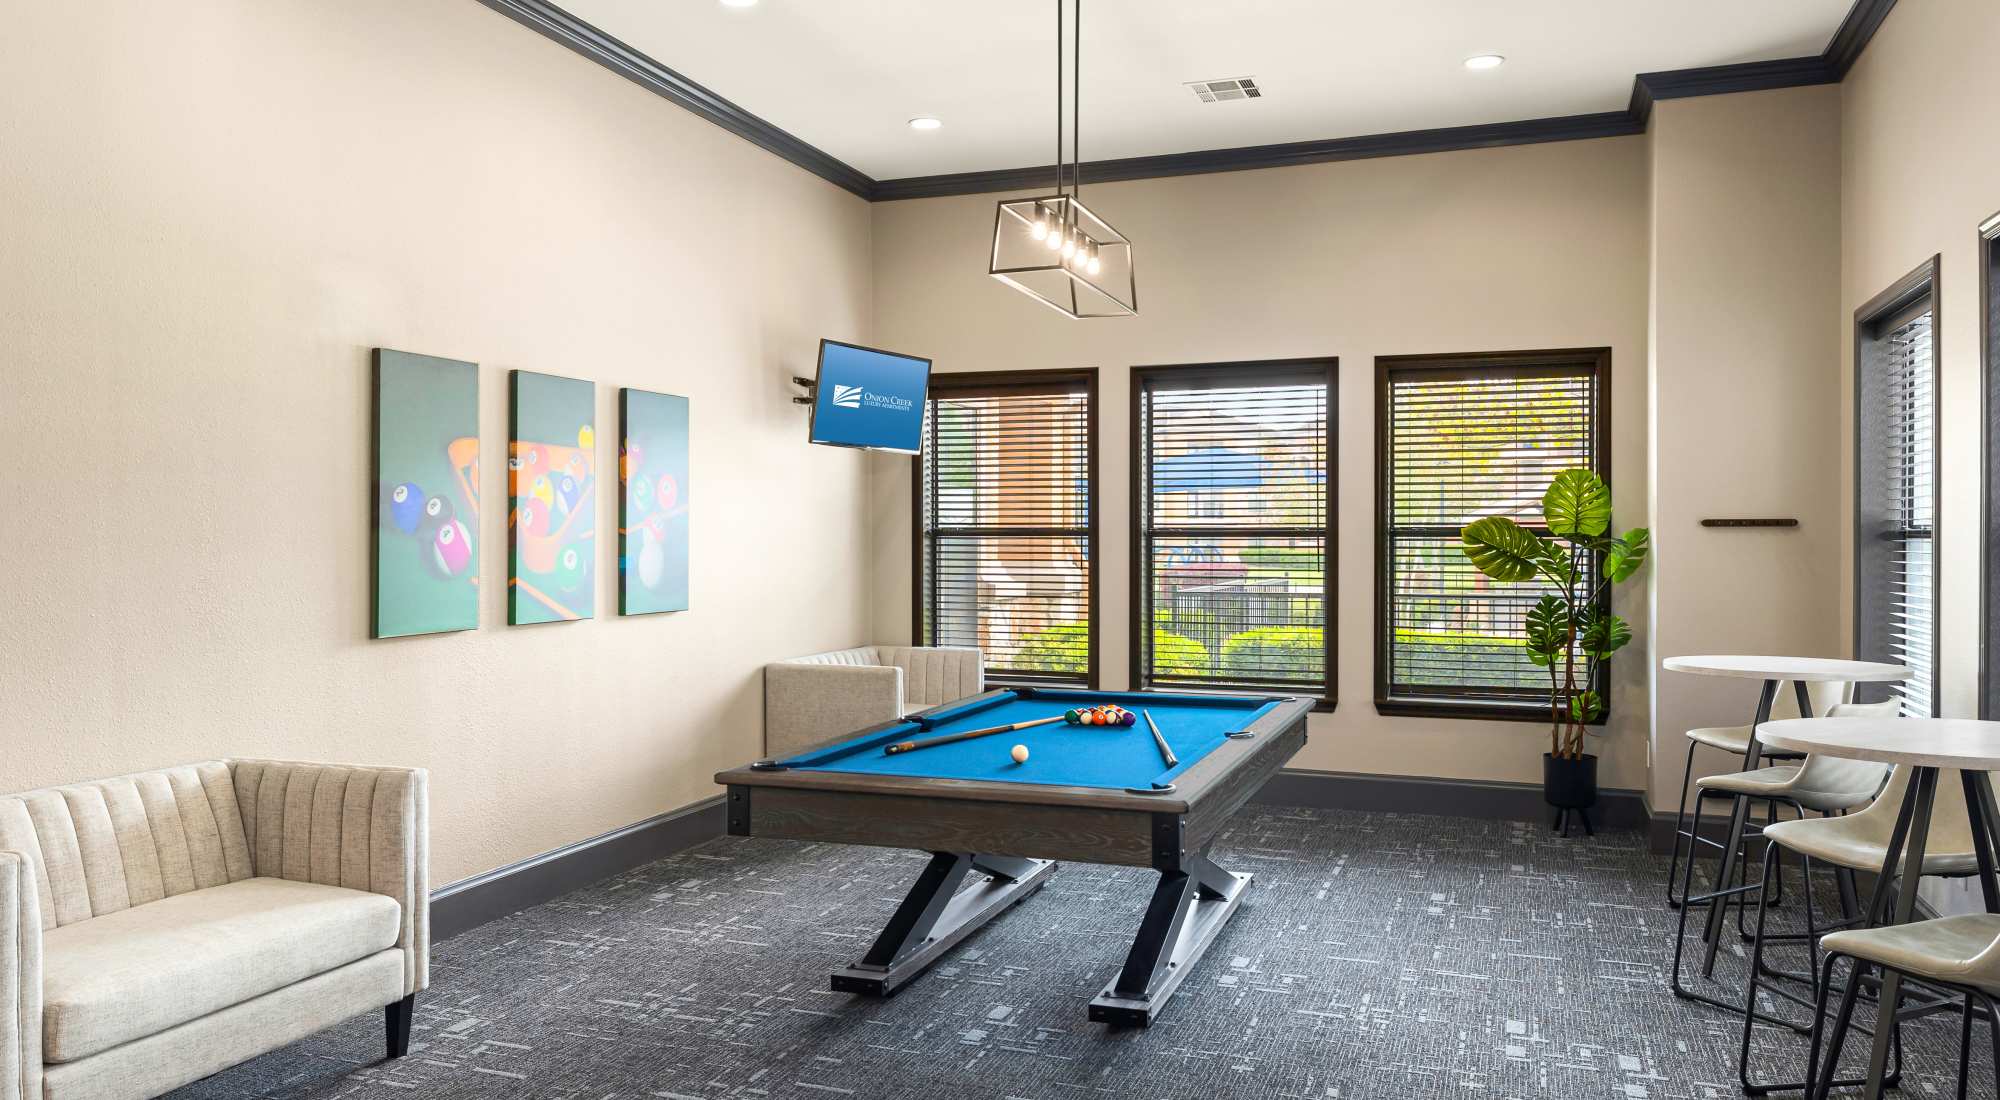 Game room at Onion Creek